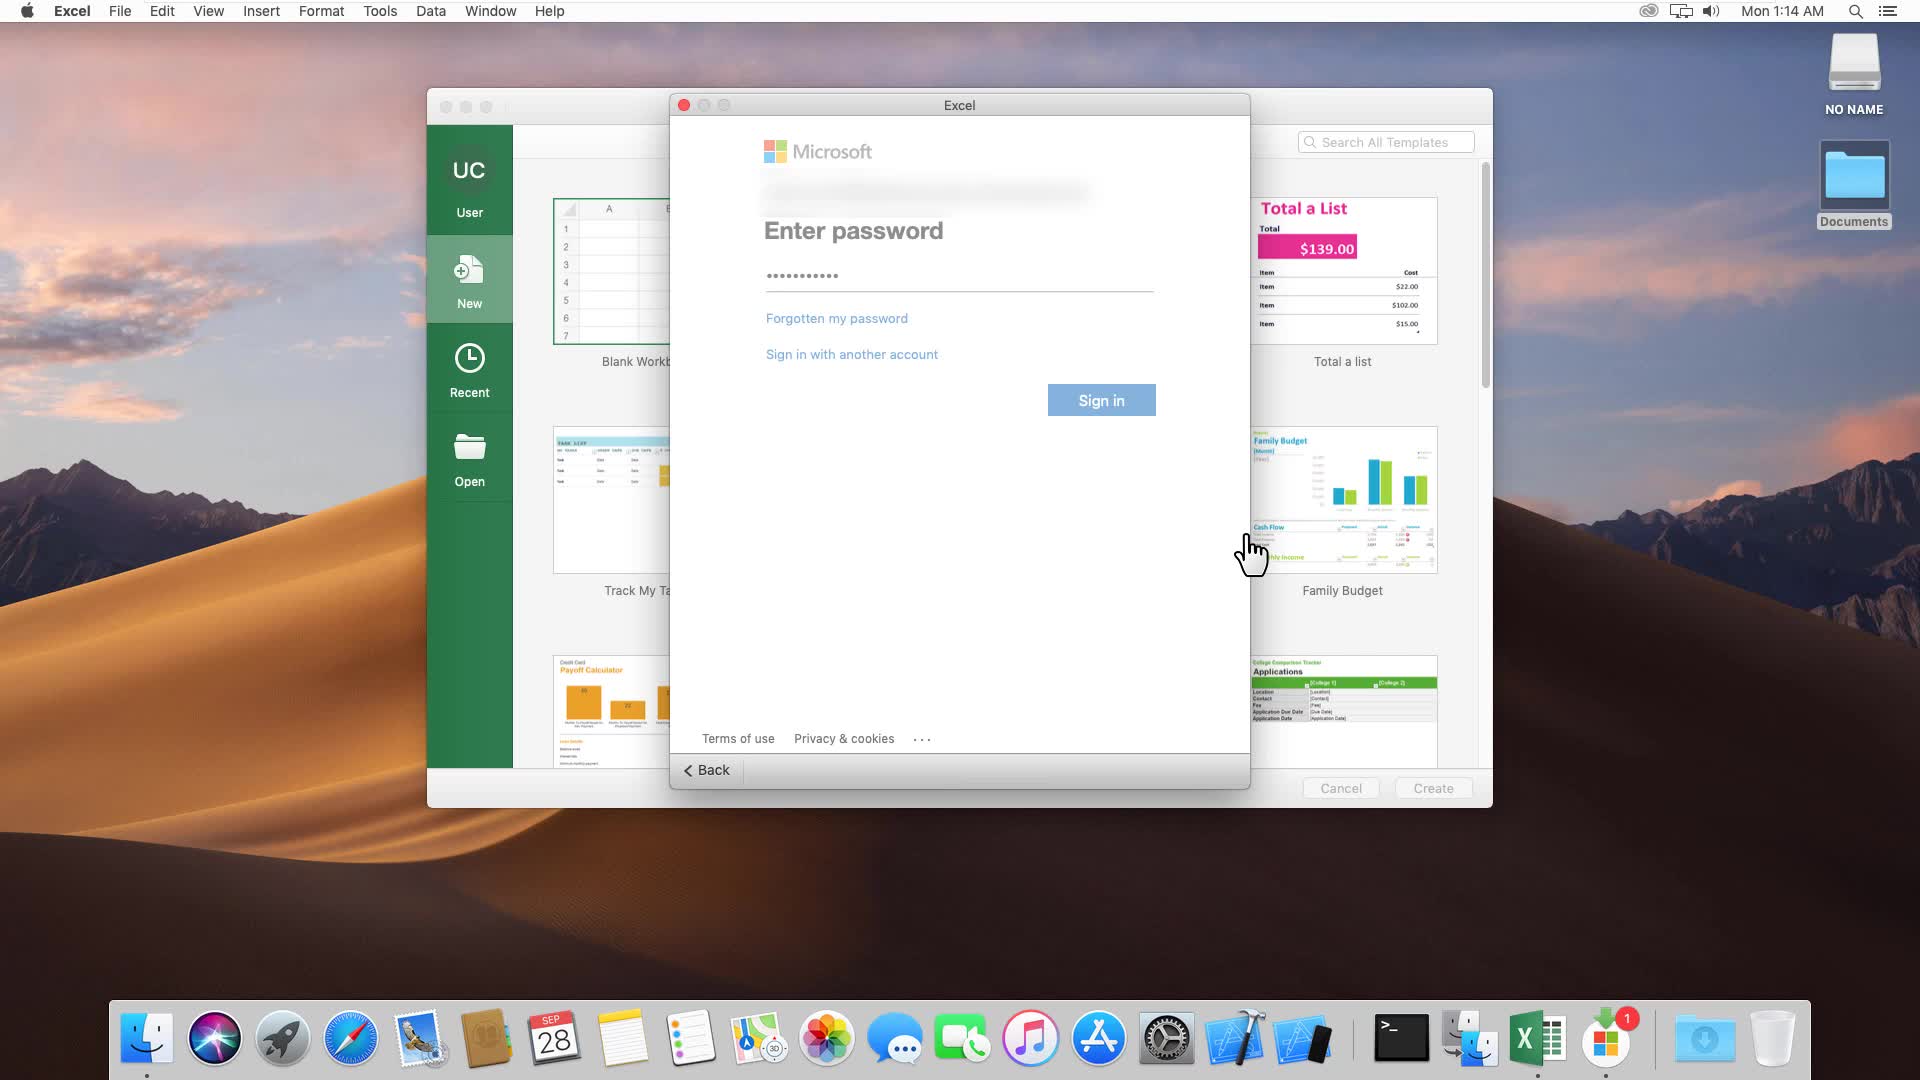 can i reinstall office for mac 2011